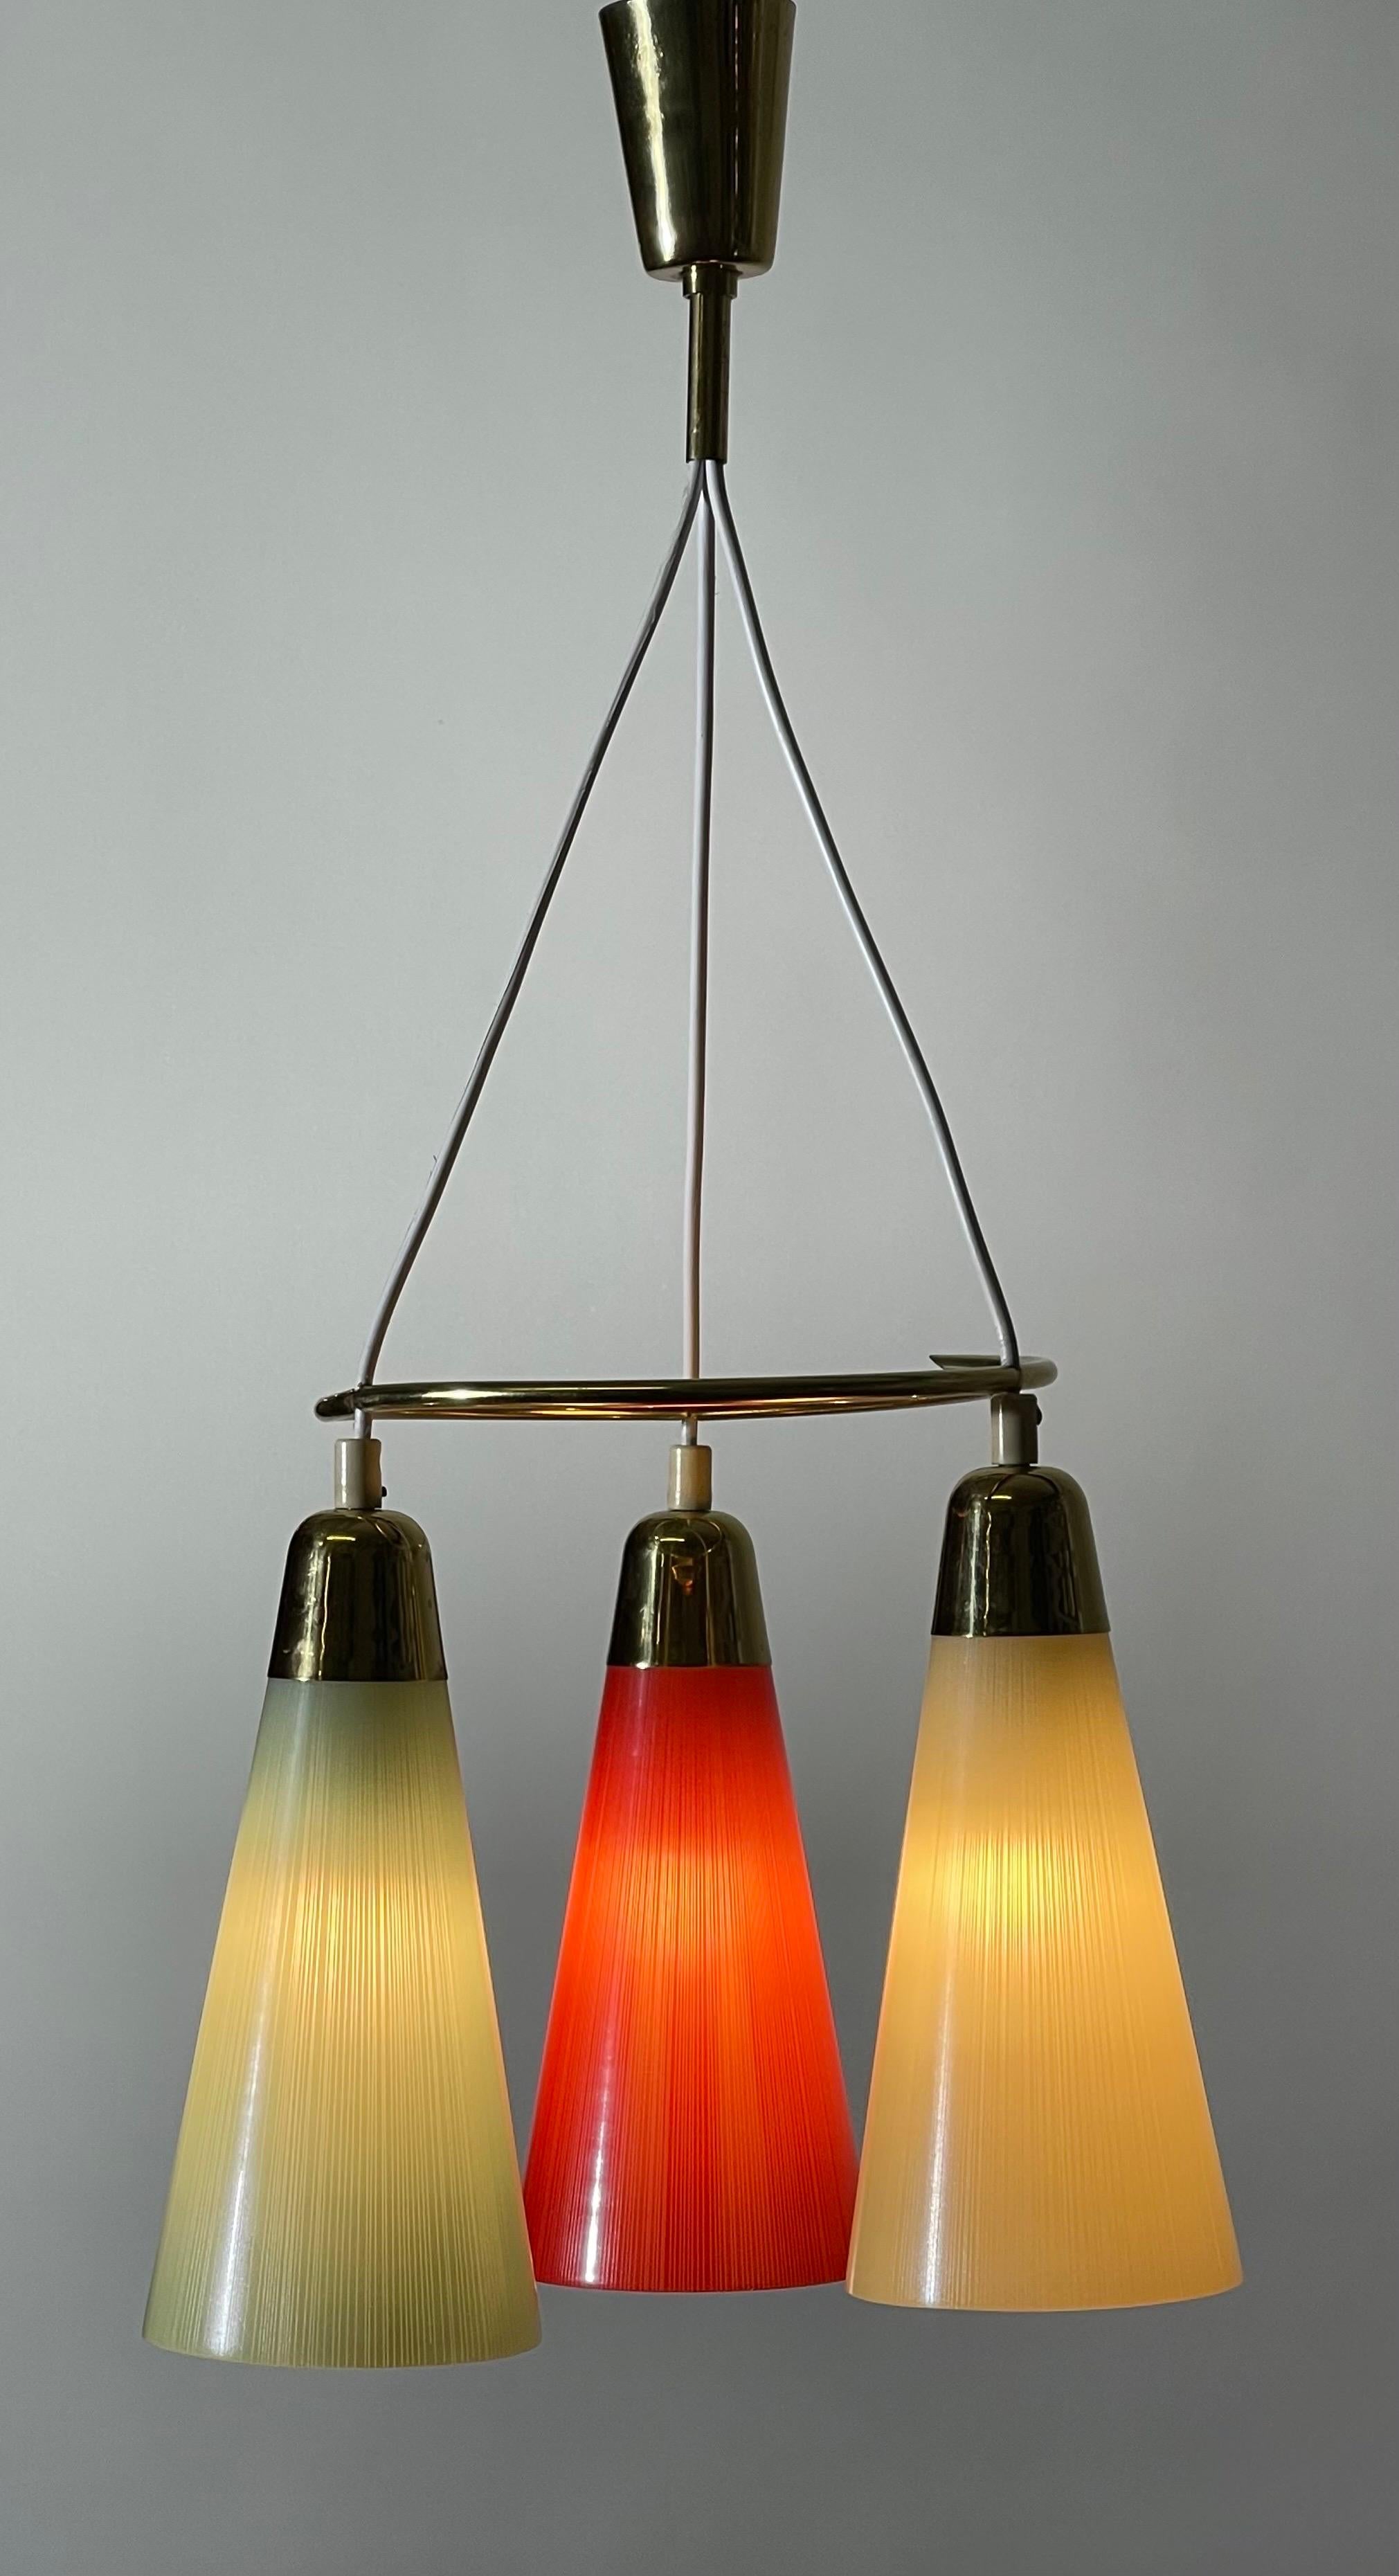 Stilnovo Style Polished Brass and Multicolor Glass Pendant, circa 1950s For Sale 5